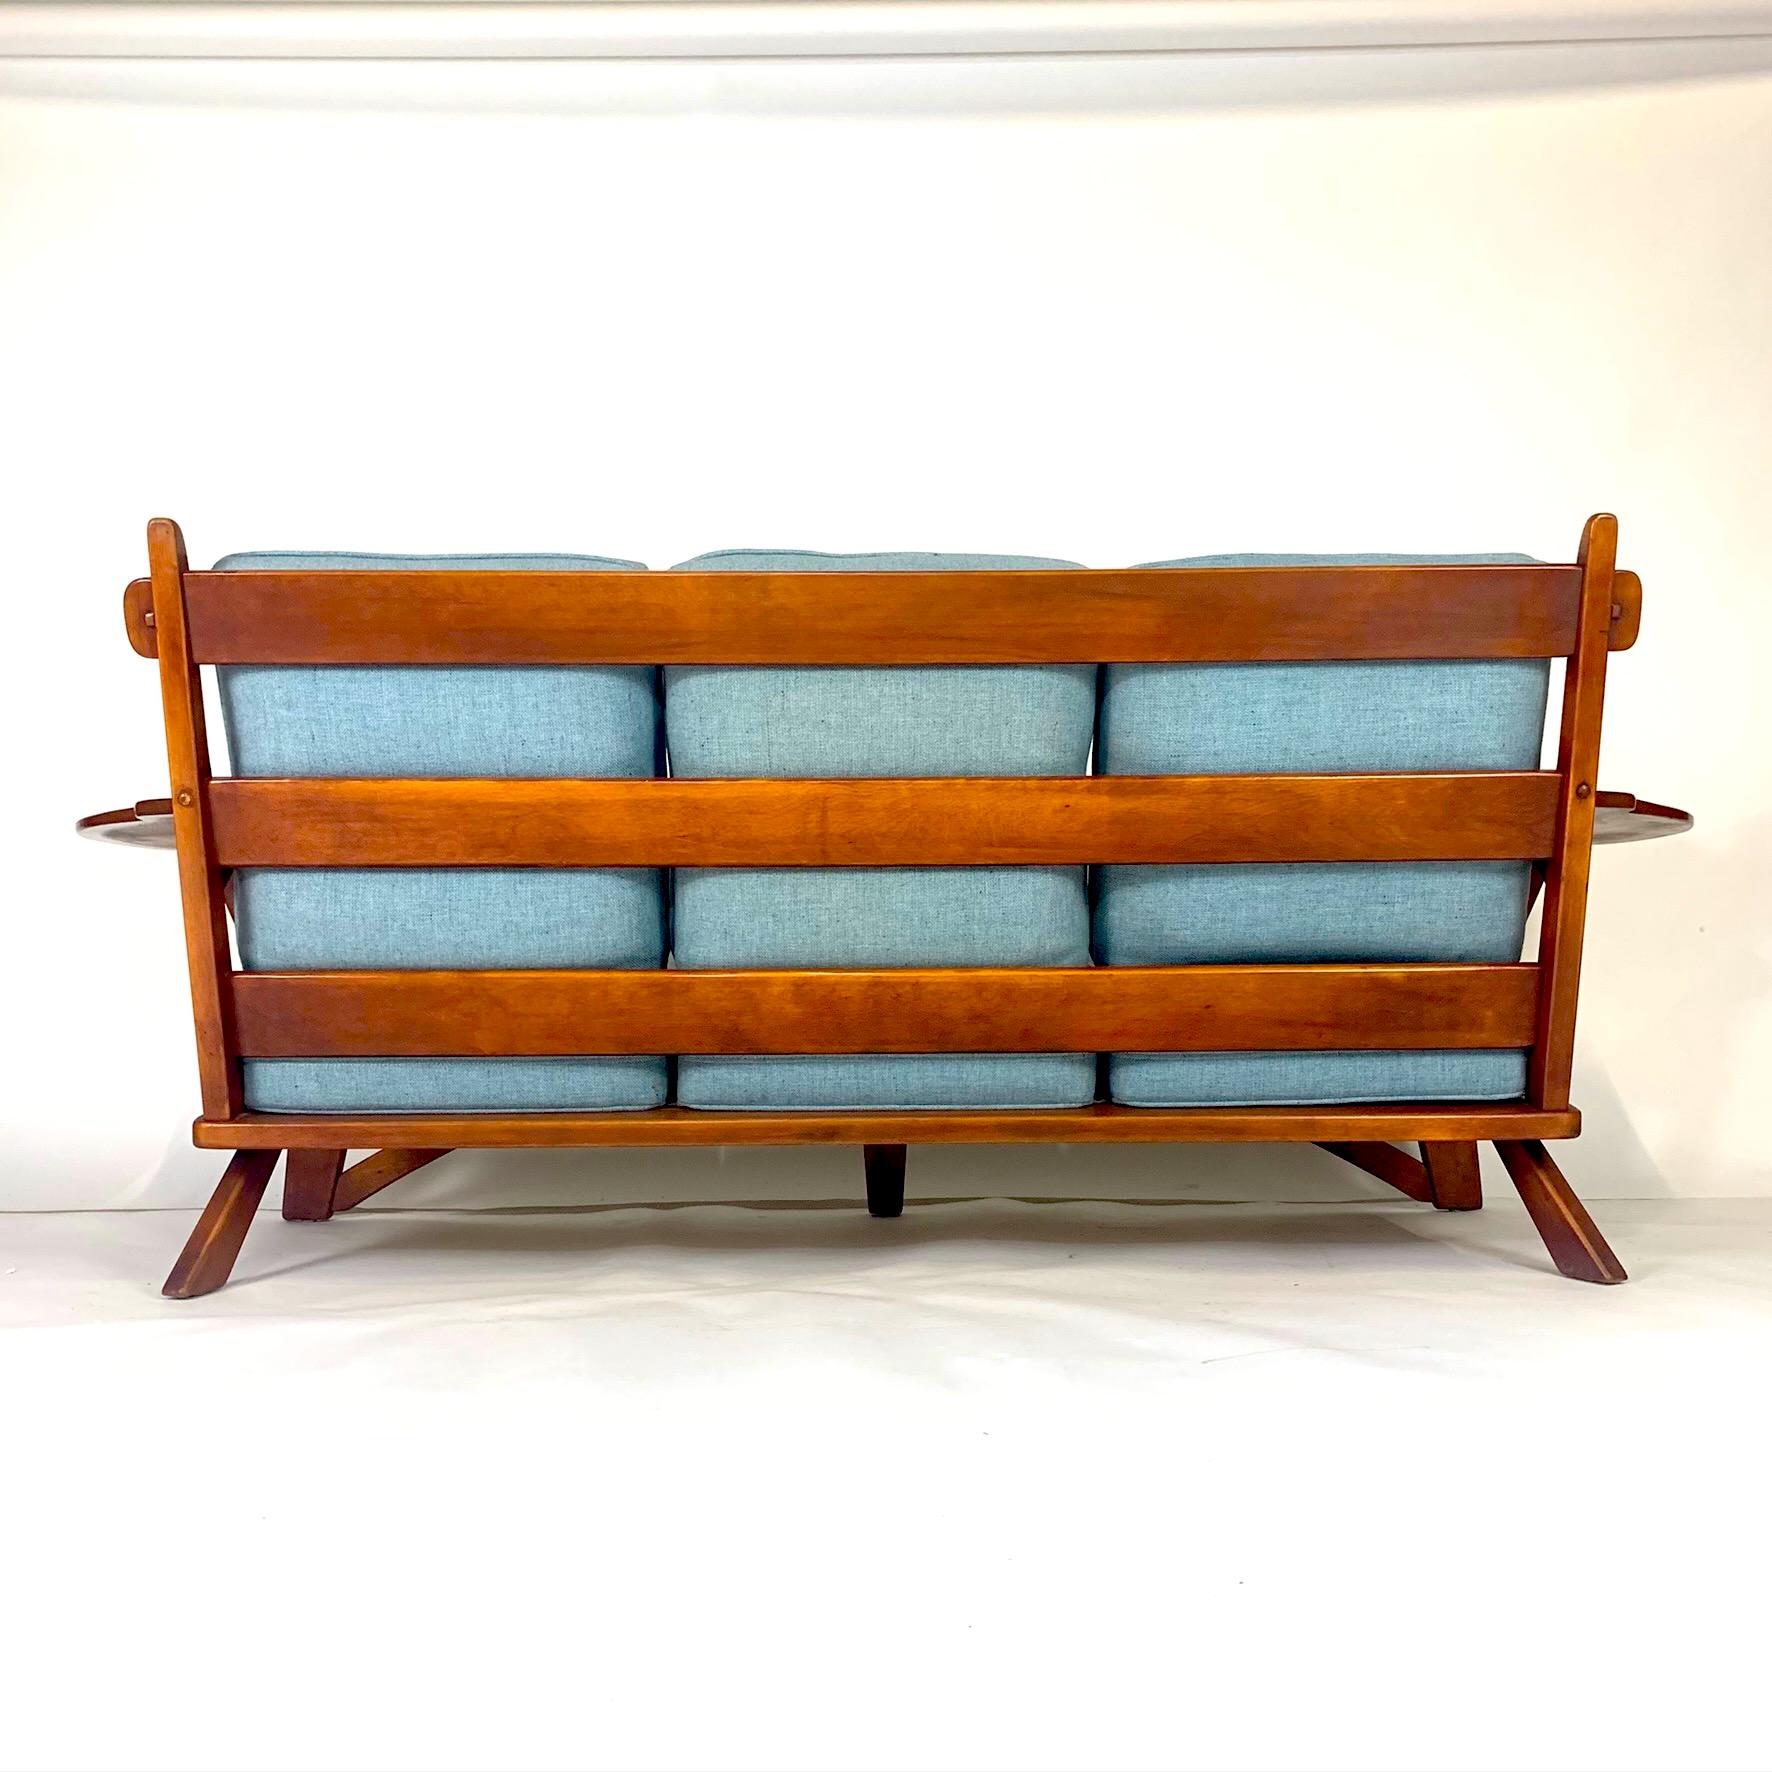 A beautifully preserved original finish paddle arm sofa by Cushman from the 1930s colonial creations line designed by William DeVries. Model No. 5-184-3. This sofa is very comfortable and stylish and would work well with Mid-Century Modern or